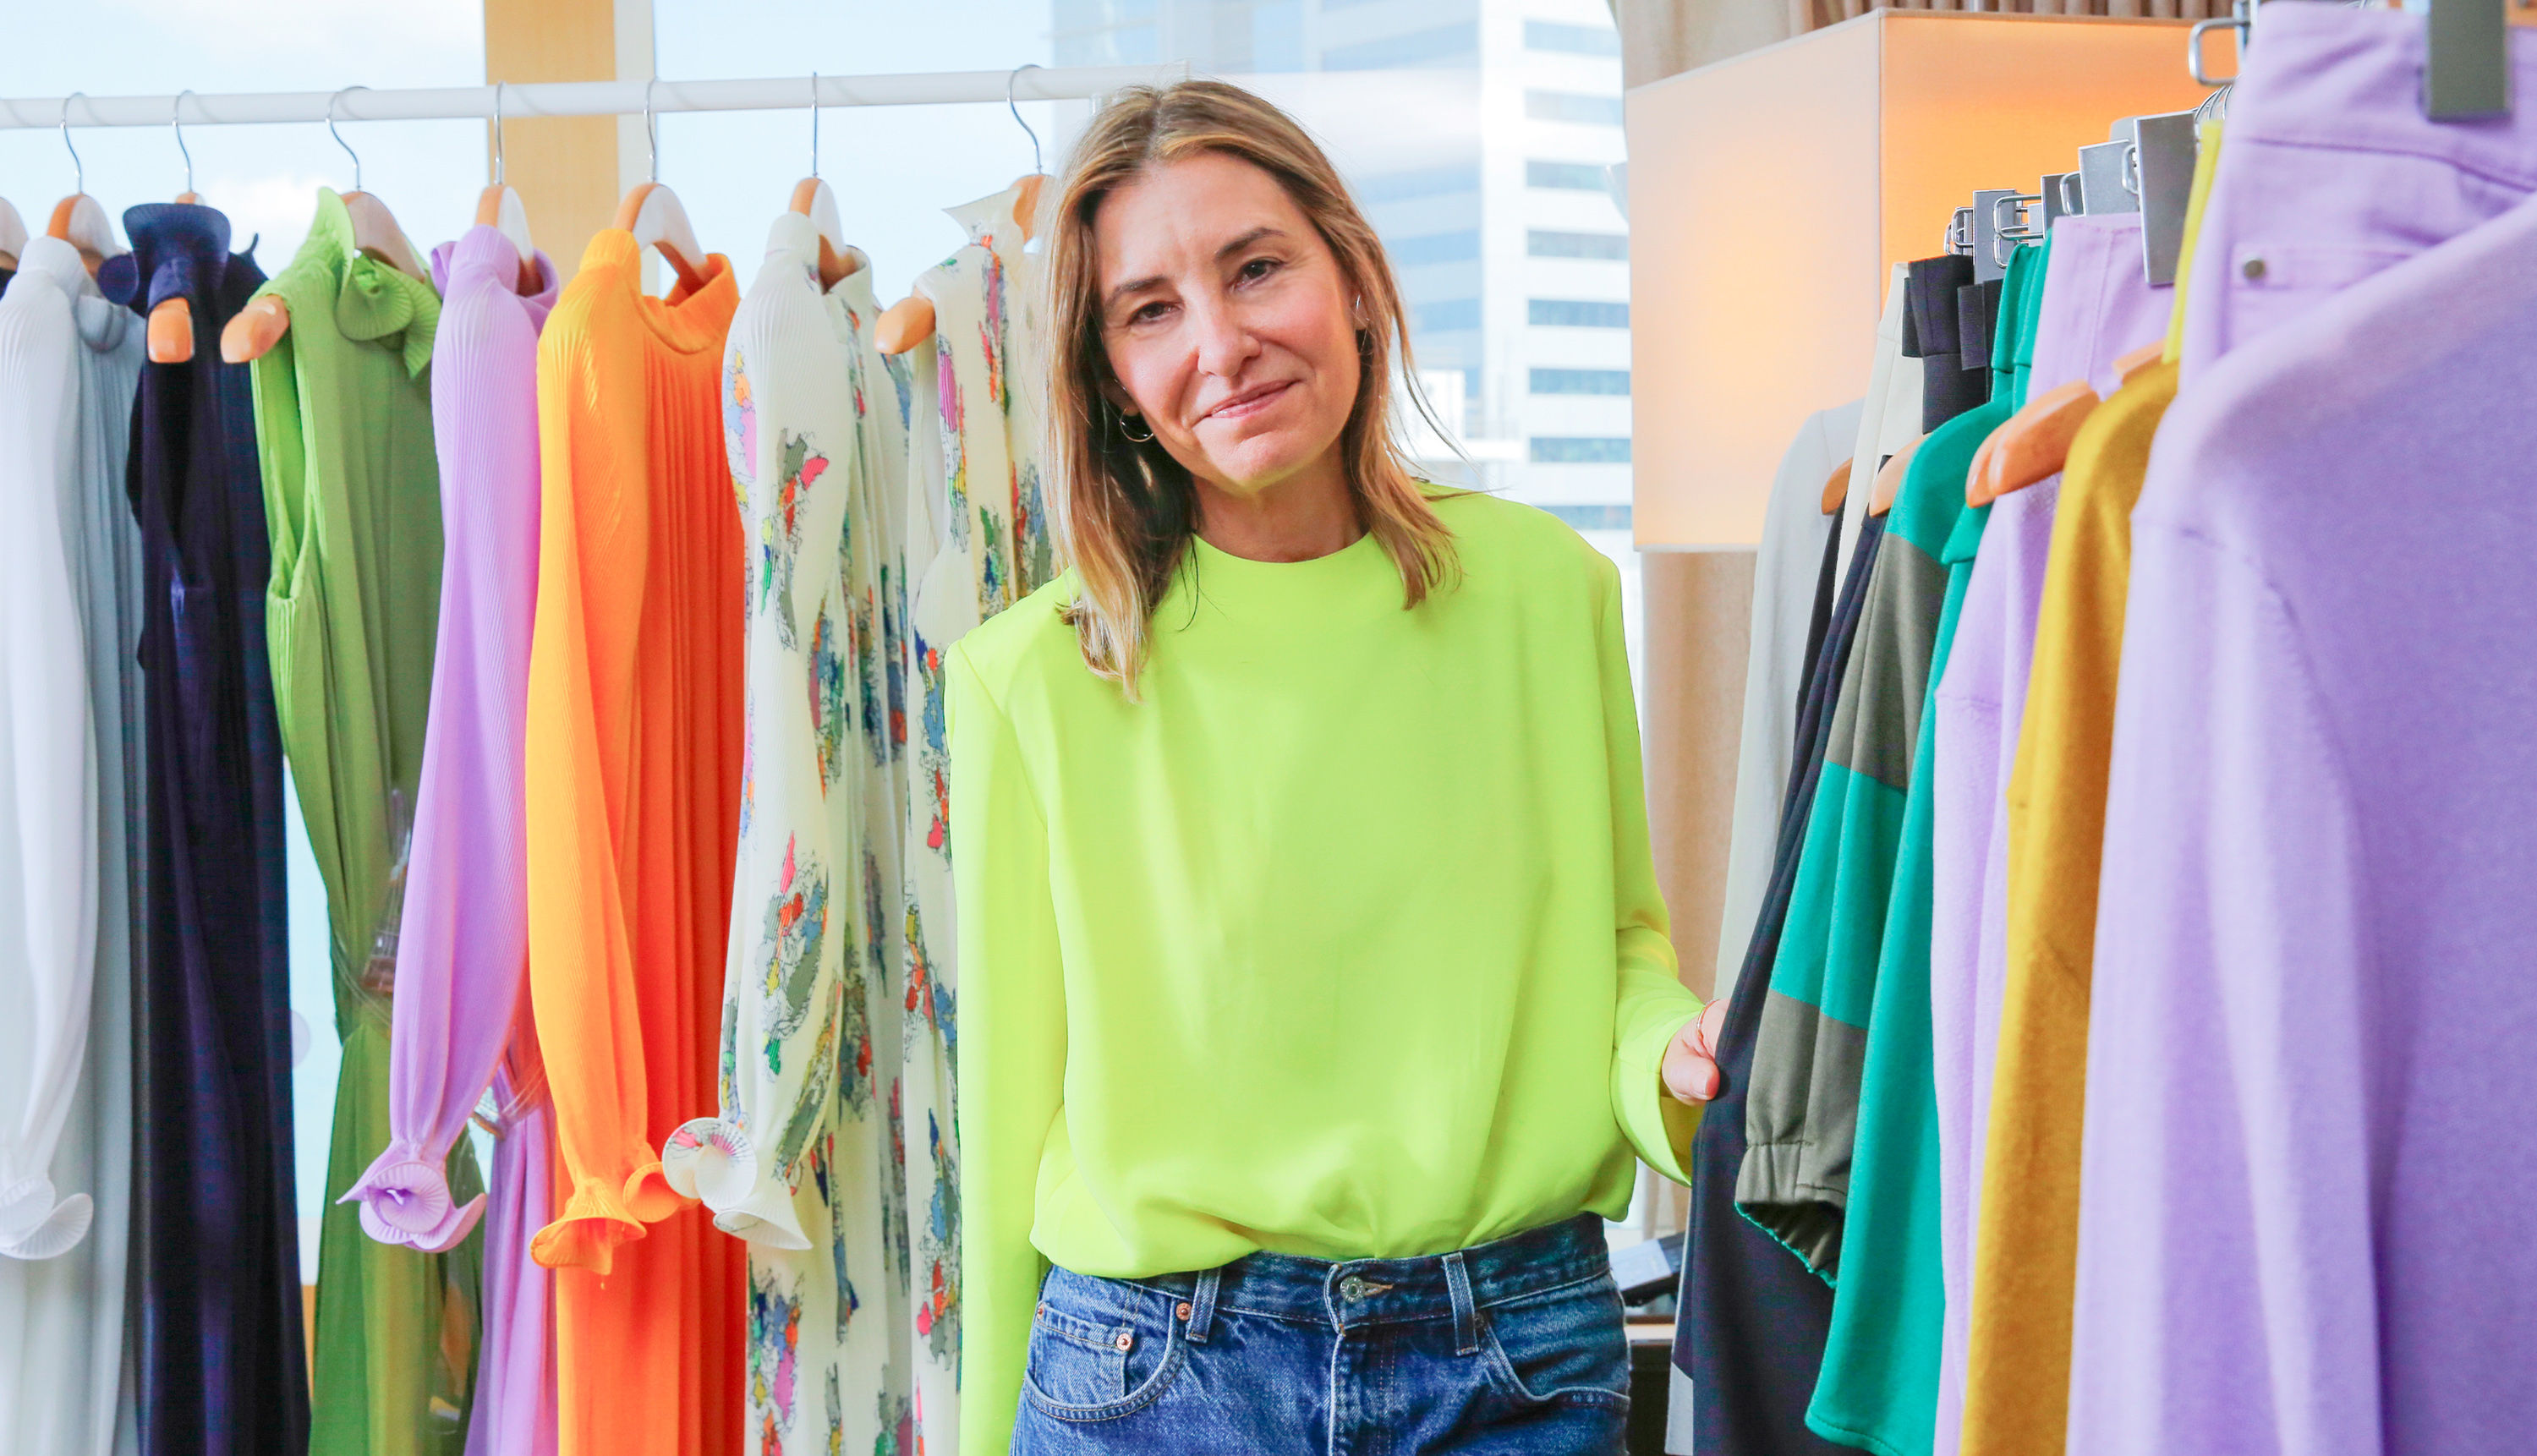 Tibi’s Amy Smilovic shares her essential style principles and her love for Hong Kong